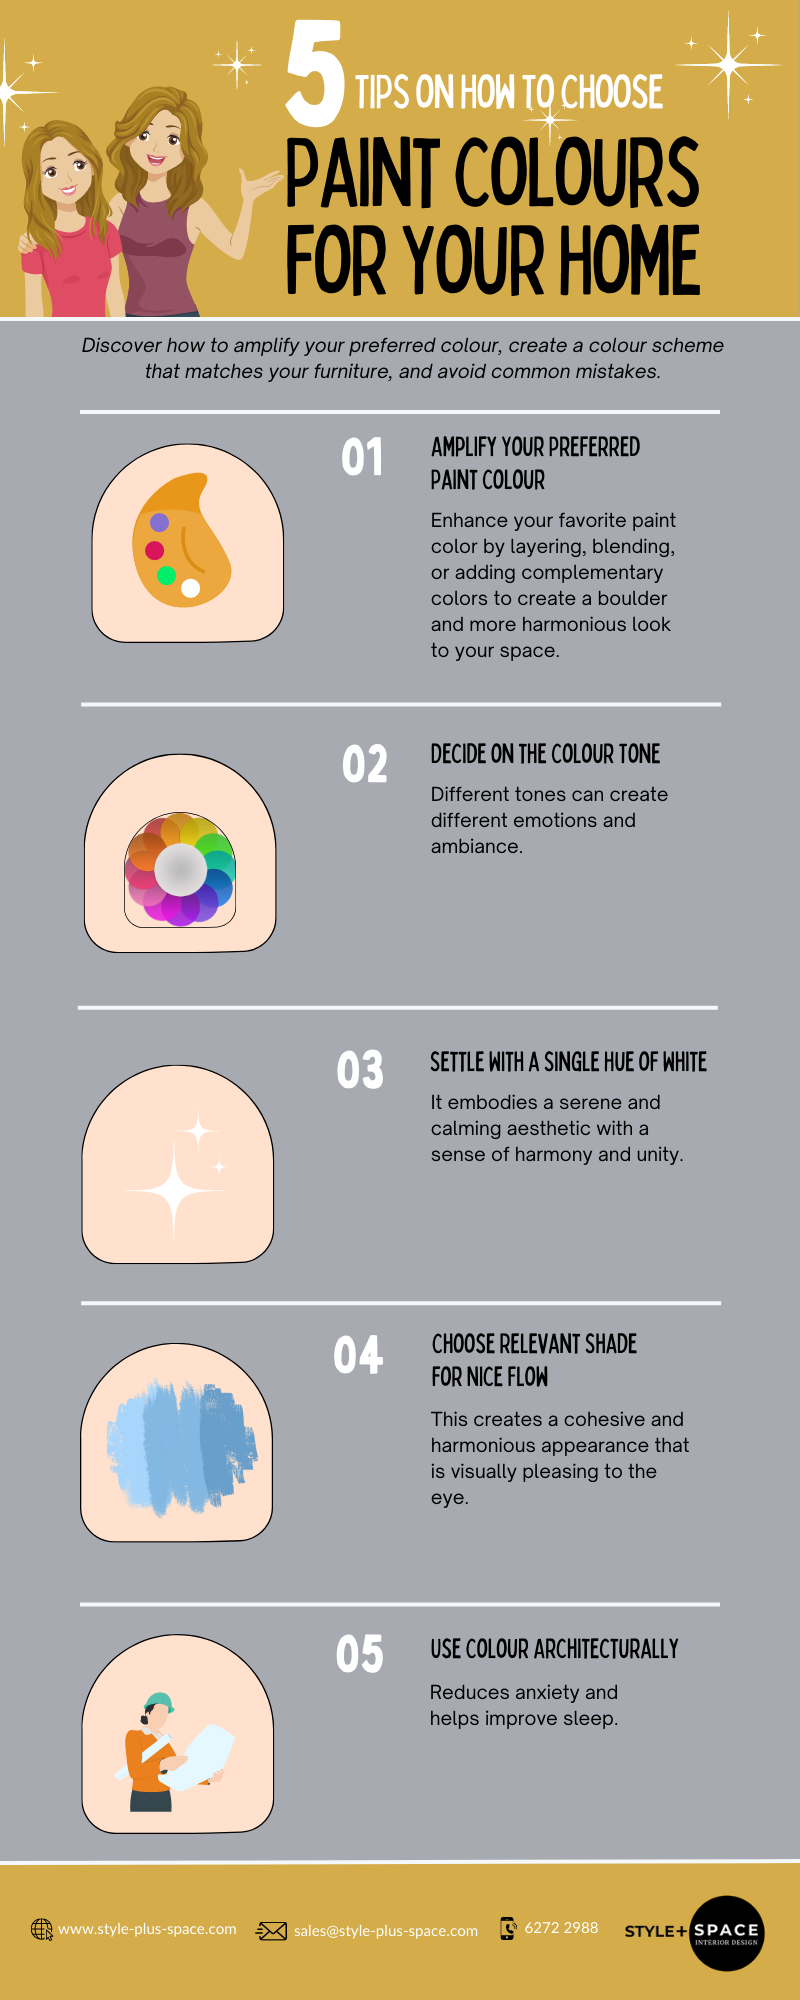 Tips on How To Choose Paint Colours for Your Home